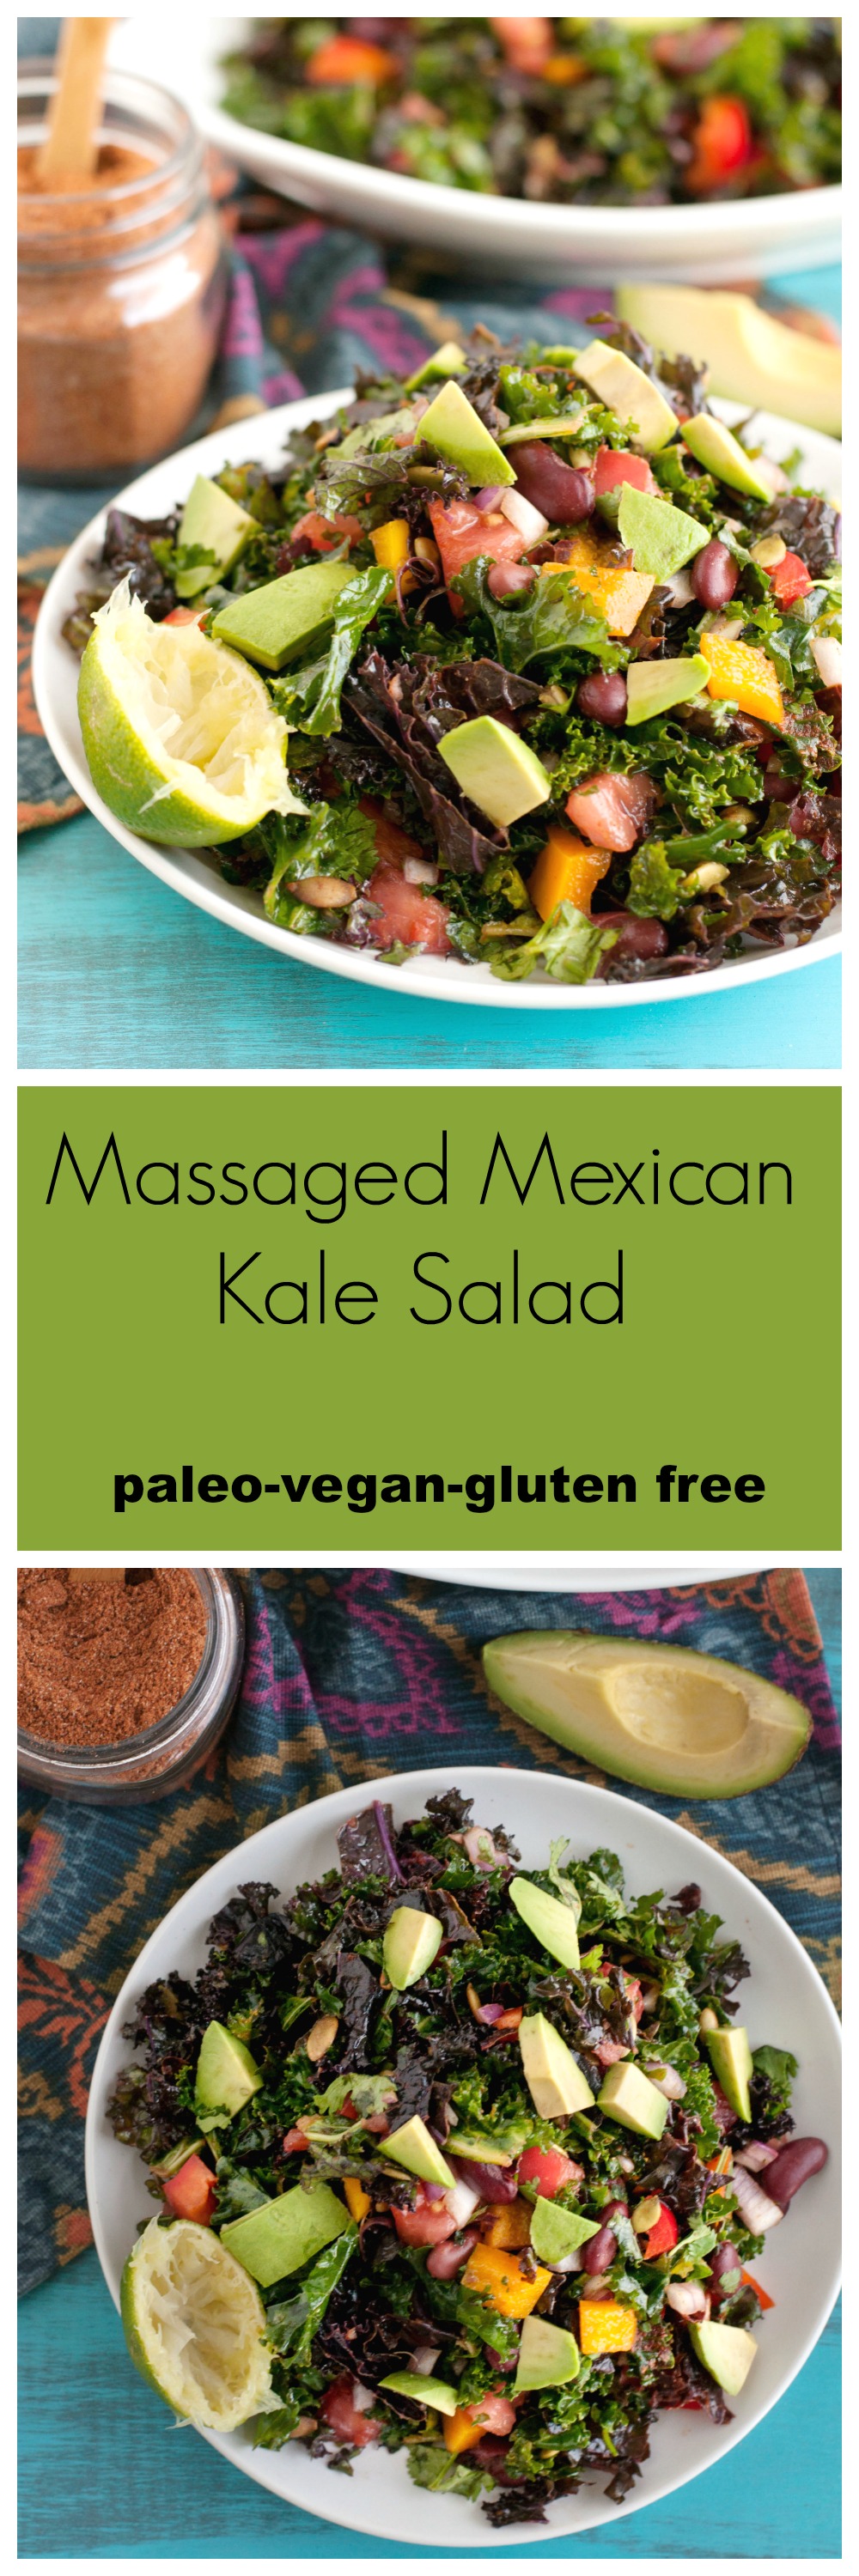 Massaged Mexican Kale Salad - The Organic Dietitian